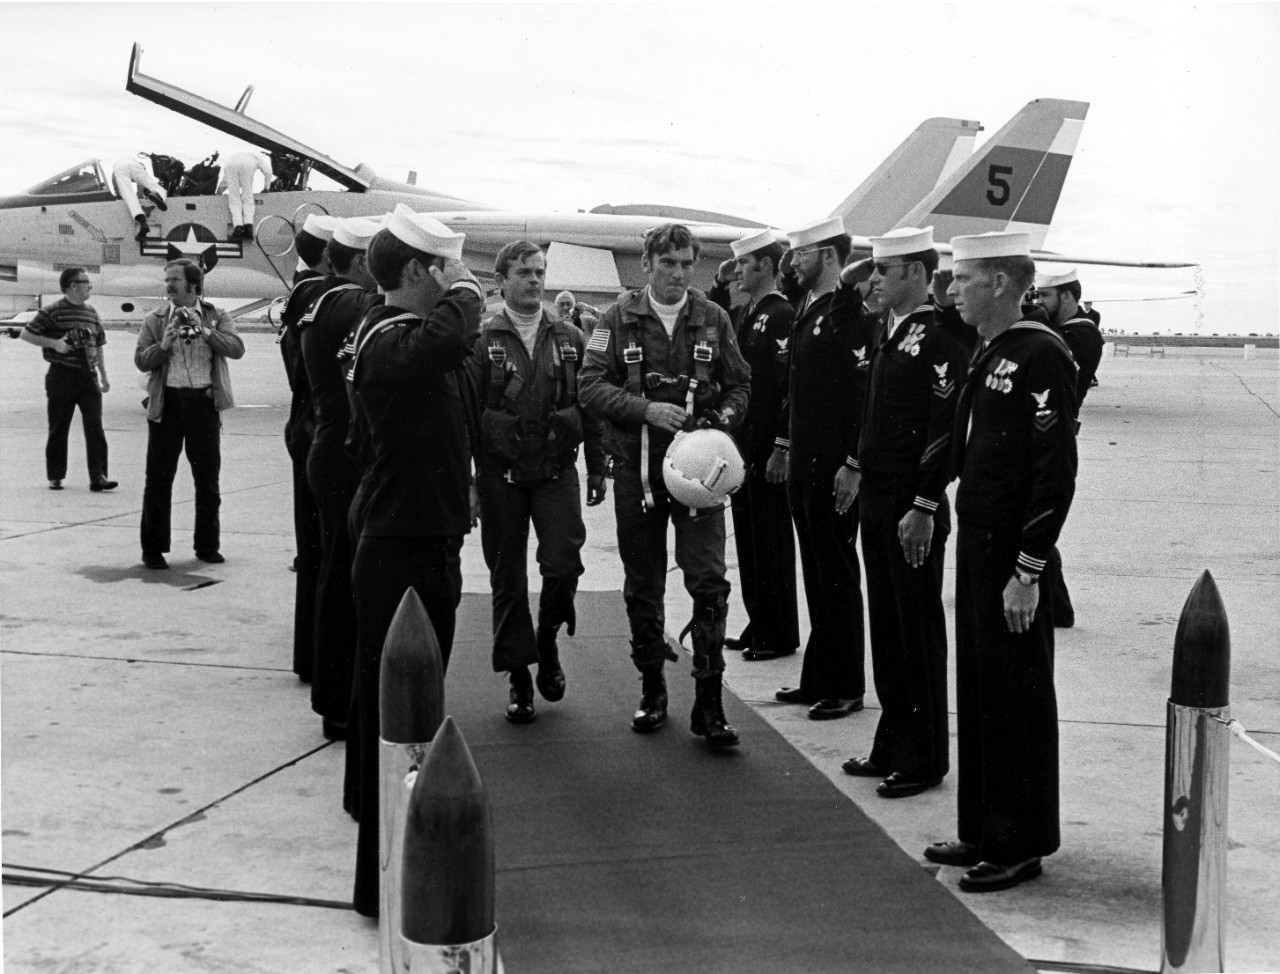 <p>Naval Air Station Miramar, CA - the Honorable John W. Warner, Secretary of the Navy, walks between the sideboys as he arrives at the station for the establishment ceremony for fighter squadrons one and two (VF-1 and VF-2). He arrived in an F-14A Tomcat fighter aircraft which is what the two squadrons will be flying. October 14, 1972.</p>
